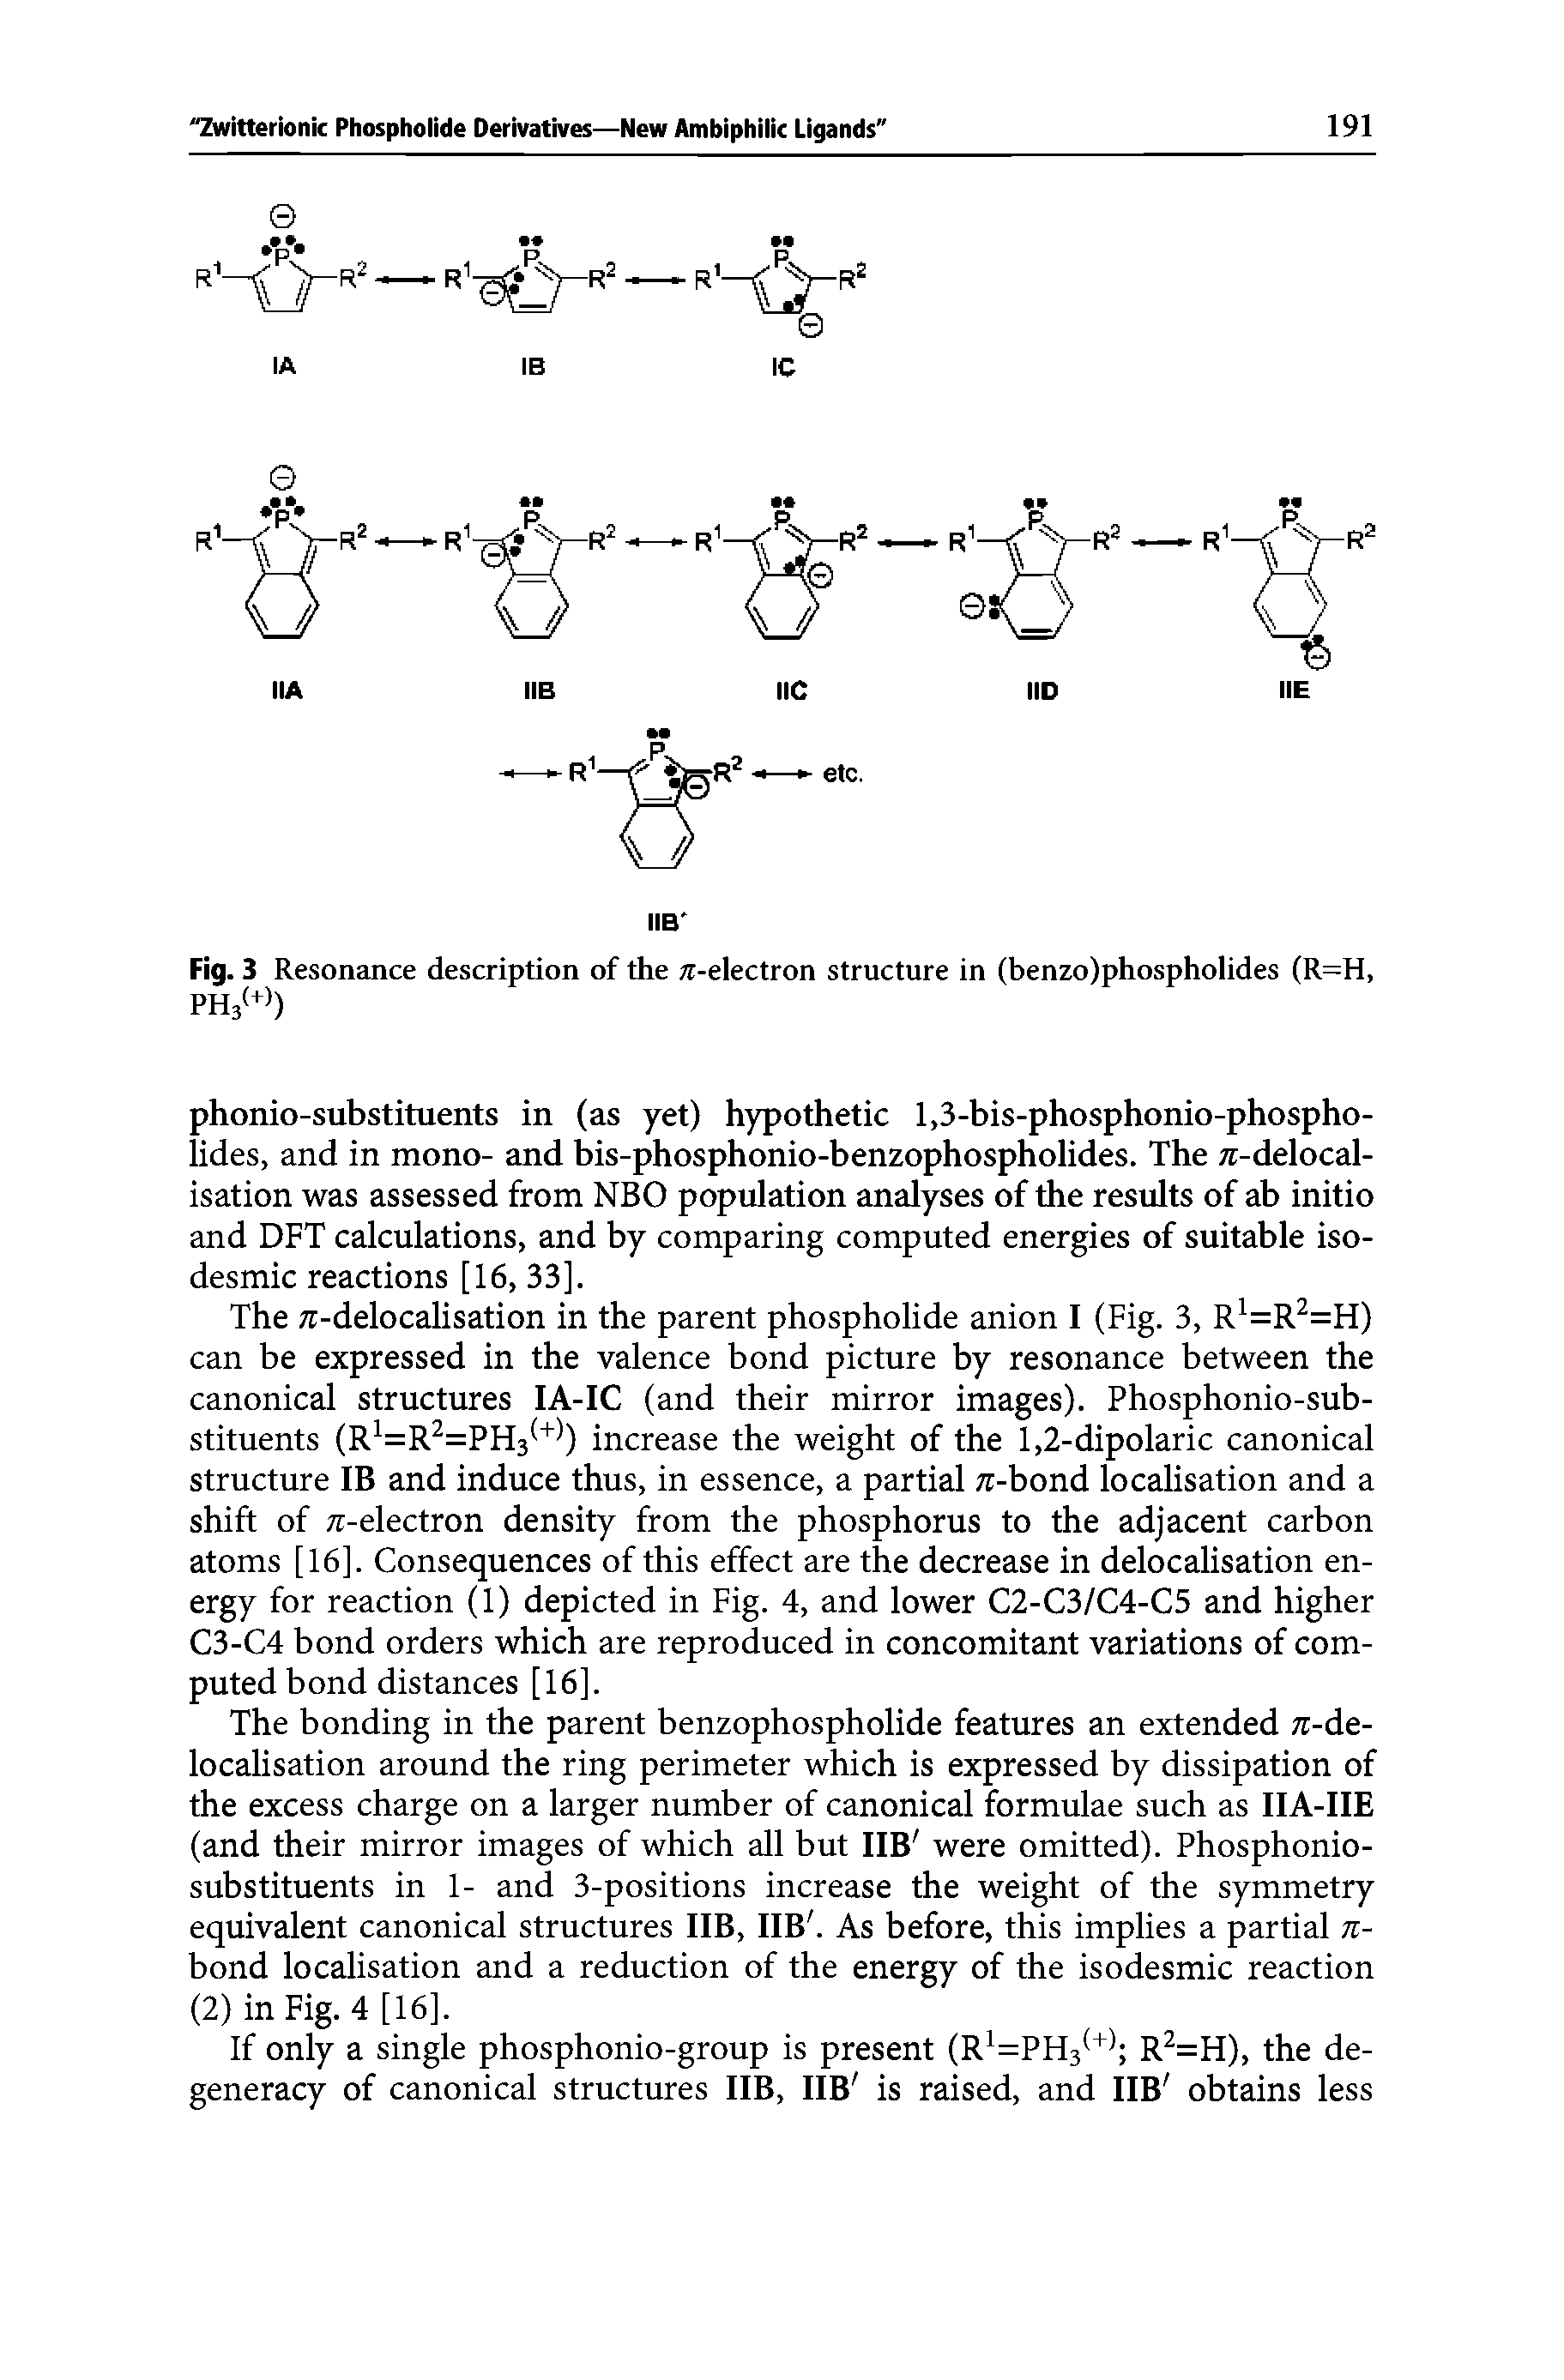 Fig. 3 Resonance description of the r-electron structure in (benzo)phospholides (R=H, PH3 +>)...